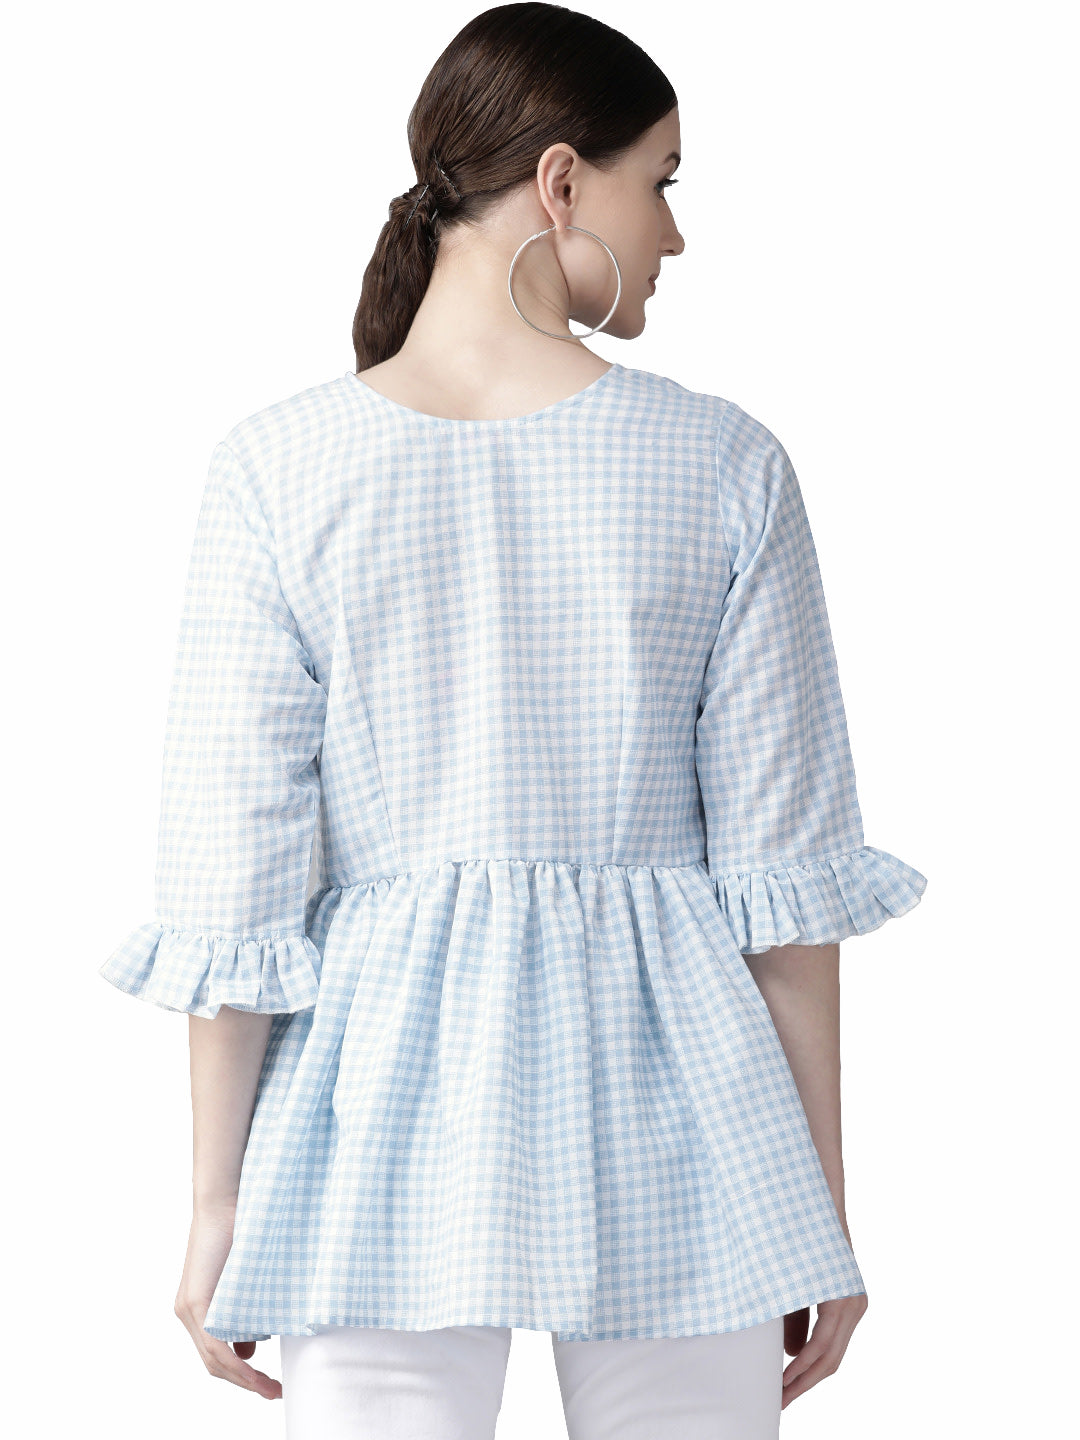 Blue & White Checked A-Line Top